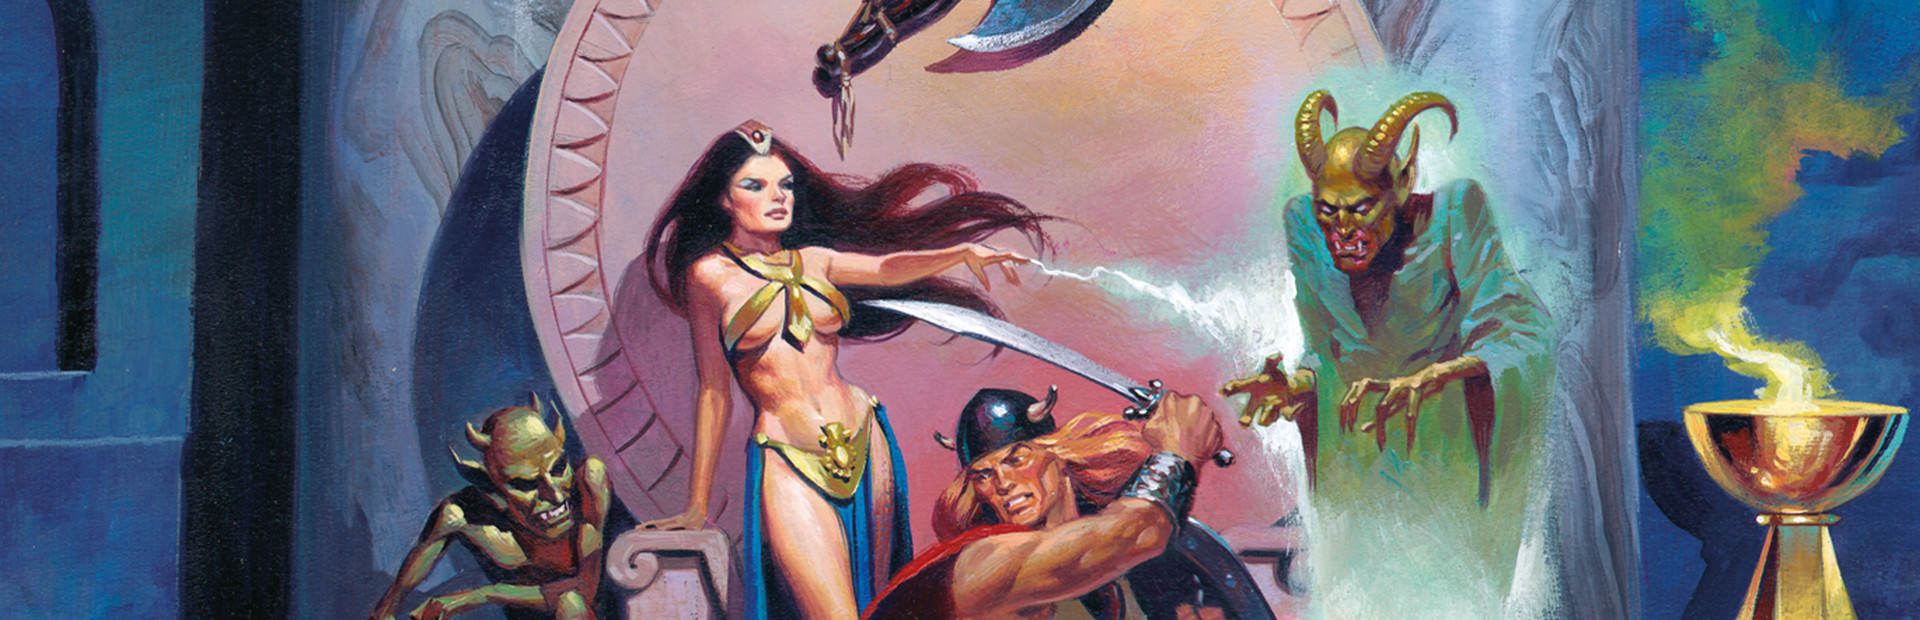 Realms of Arkania 2 - Star Trail Classic cover image